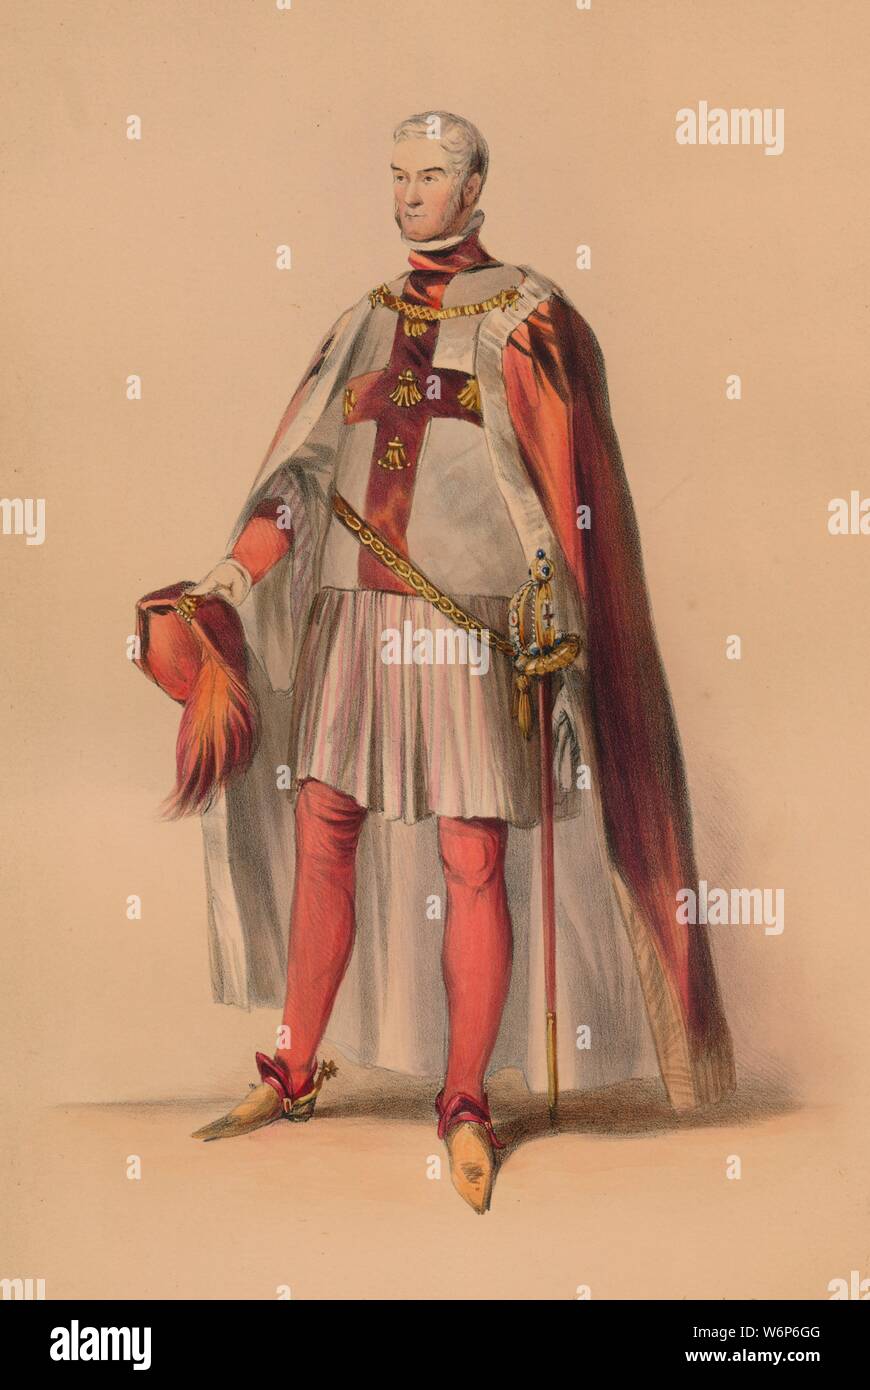 Guest in costume for Queen Victoria's Bal Costum&#xe9;, May 12 1842, (1843). Man in a cloak with the Maltese cross symbol on his tabard. Members of the Royal Household were expected to wear dress of the Plantagenet period (c1154-1485), although other guests could wear costumes of their own choosing. The costumes were designed under the supervision of James Robinson Planch&#xe9; and were specifically intended to give work to the declining Spitalfields silk industry. The ball of 1842, held at Buckingham Palace in London, was the first of three costume balls held by Queen Victoria and Albert, Pri Stock Photo